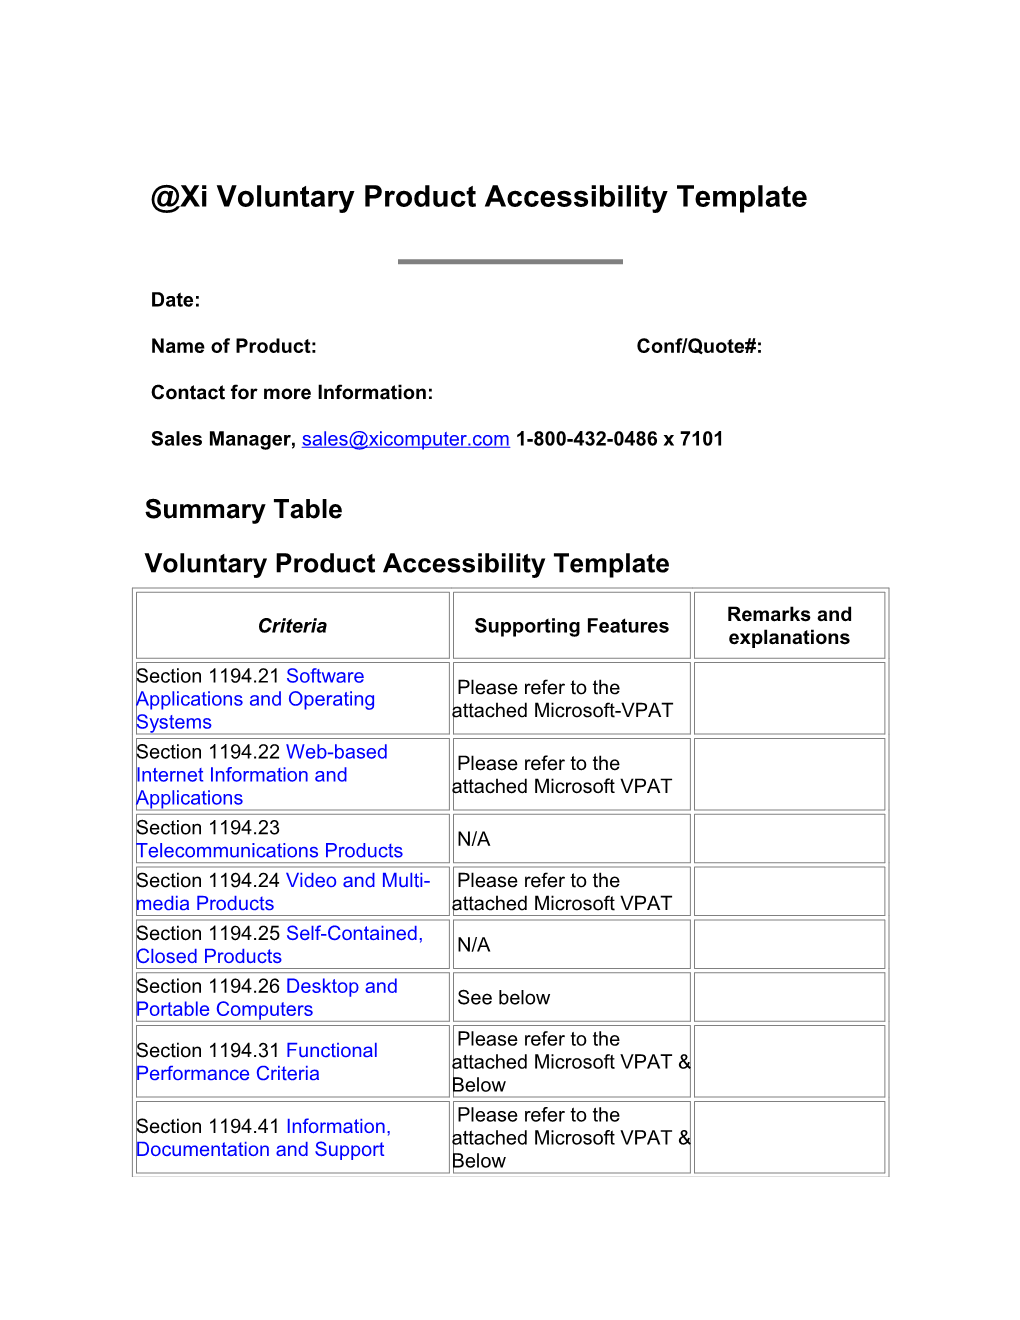 Xi Voluntary Product Accessibility Template